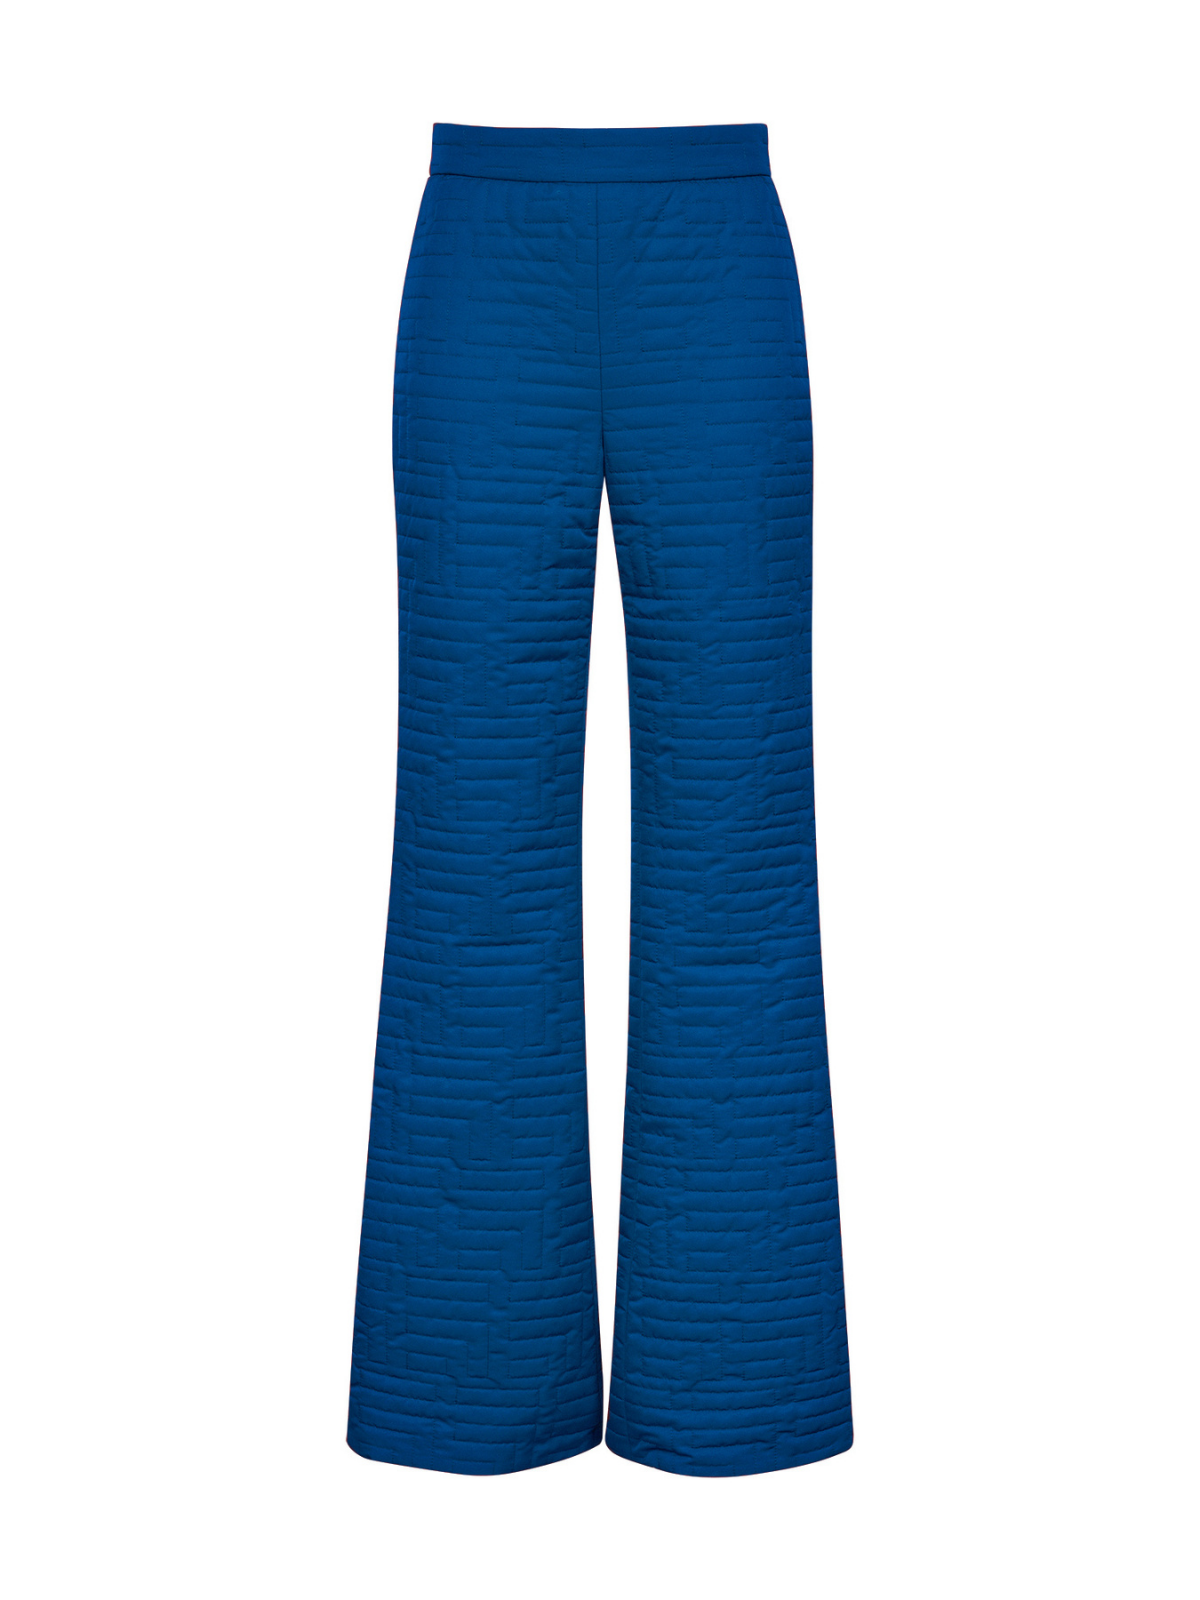 QUILTED SEAQUAL PANTS